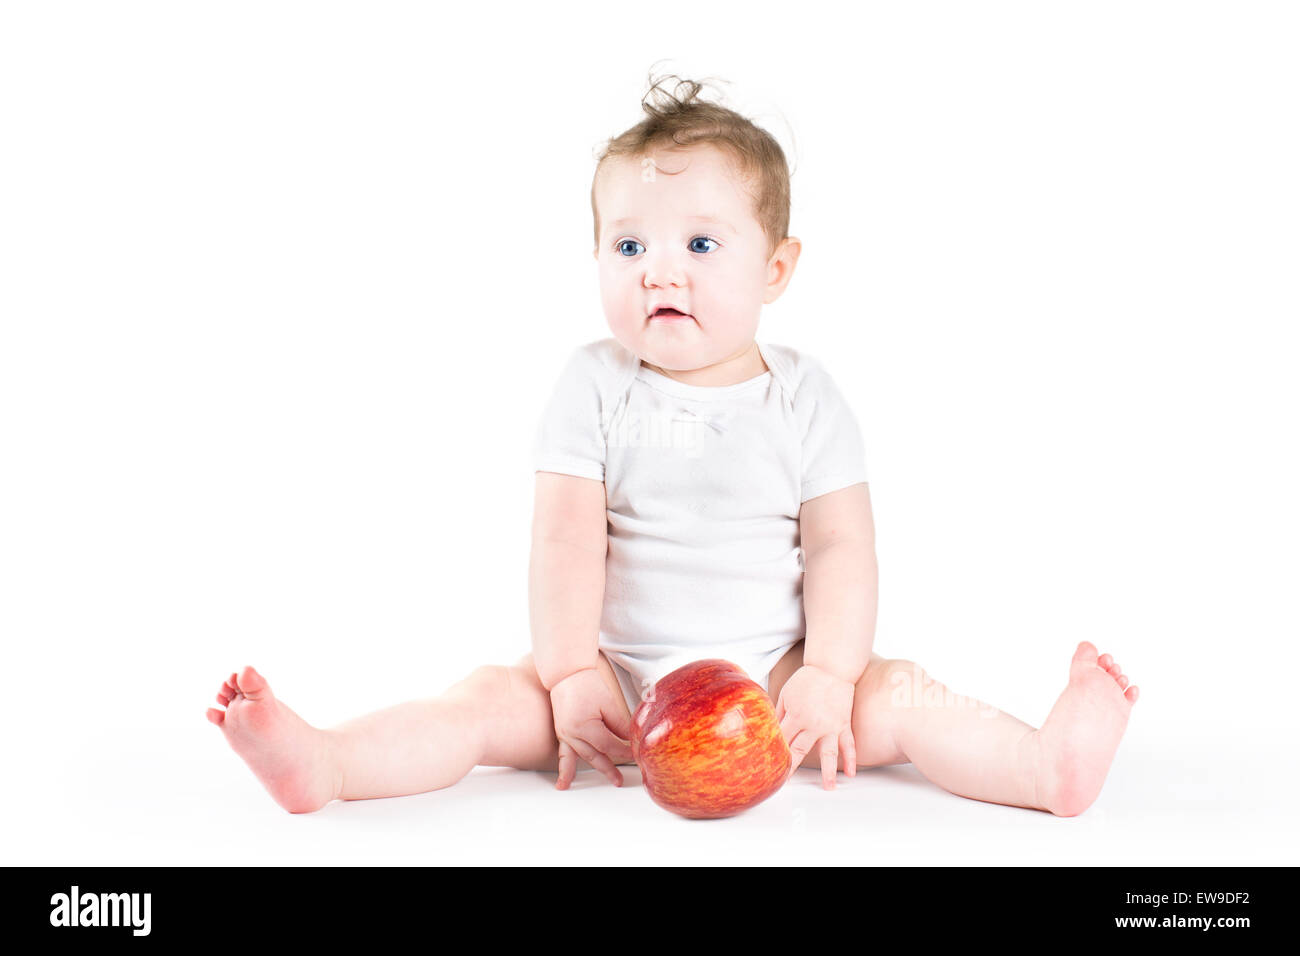 Cute baby playing with an apple Stock Photo